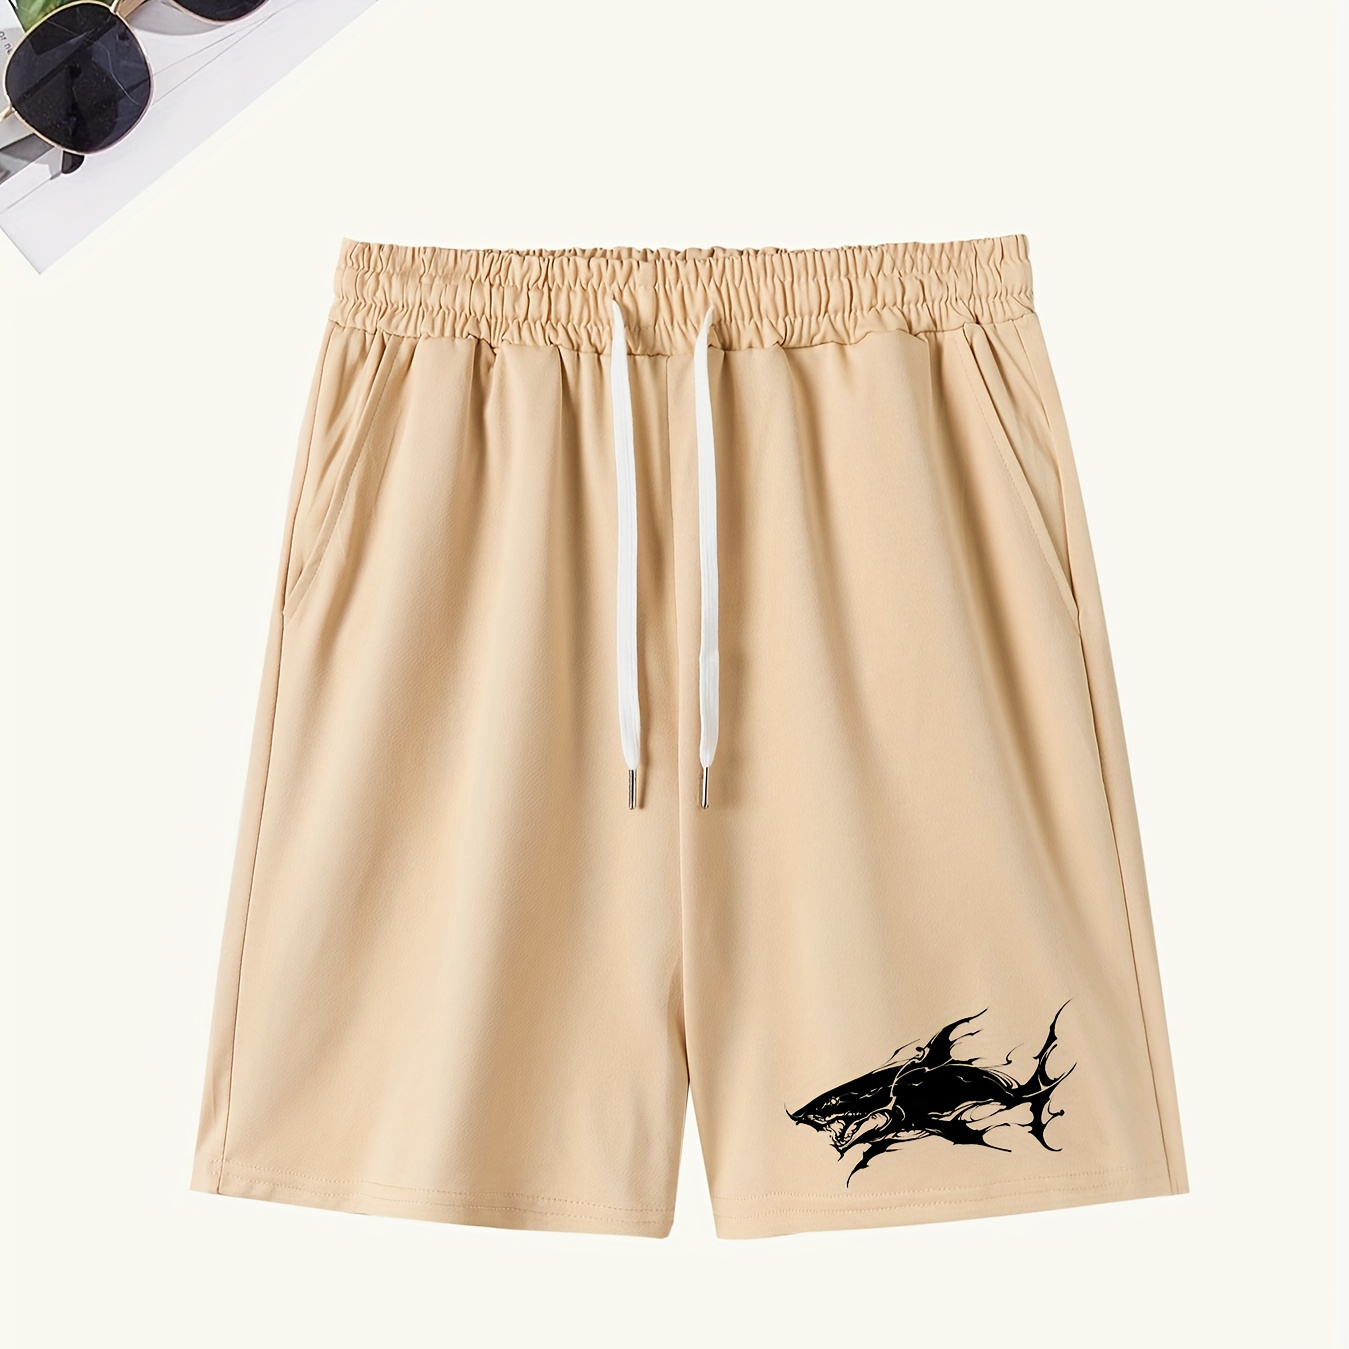 

Shark Print Men's Summer Fashionable Drawstring Casual Sports Loose Shorts, Suitable For Outdoor Sports, Comfortable And Versatile